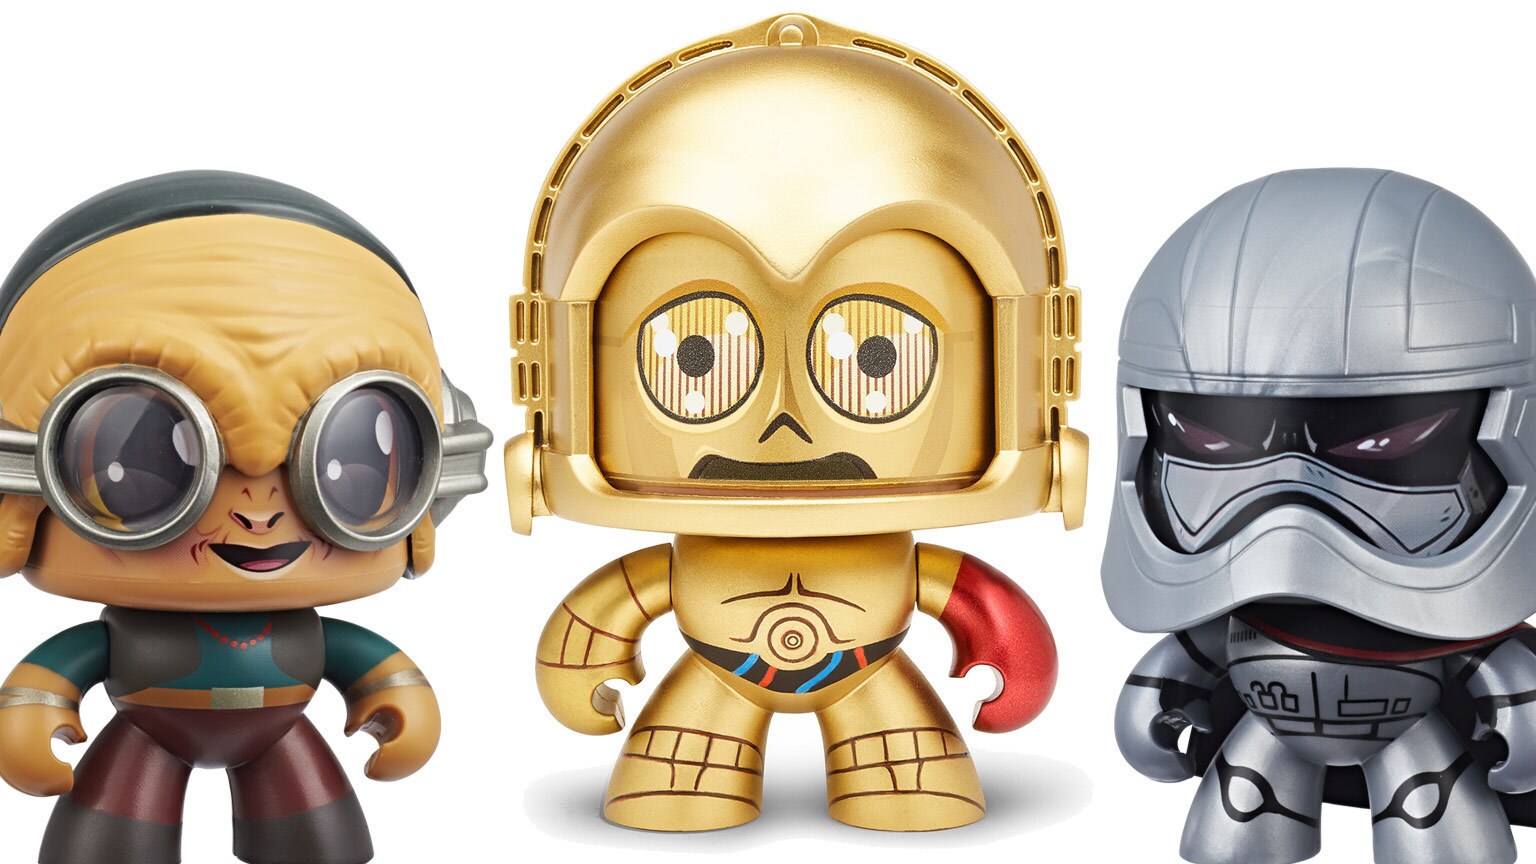 Toy Fair 2018: First Look at Captain Phasma, Maz Kanata, and C-3PO Mighty Muggs - Exclusive